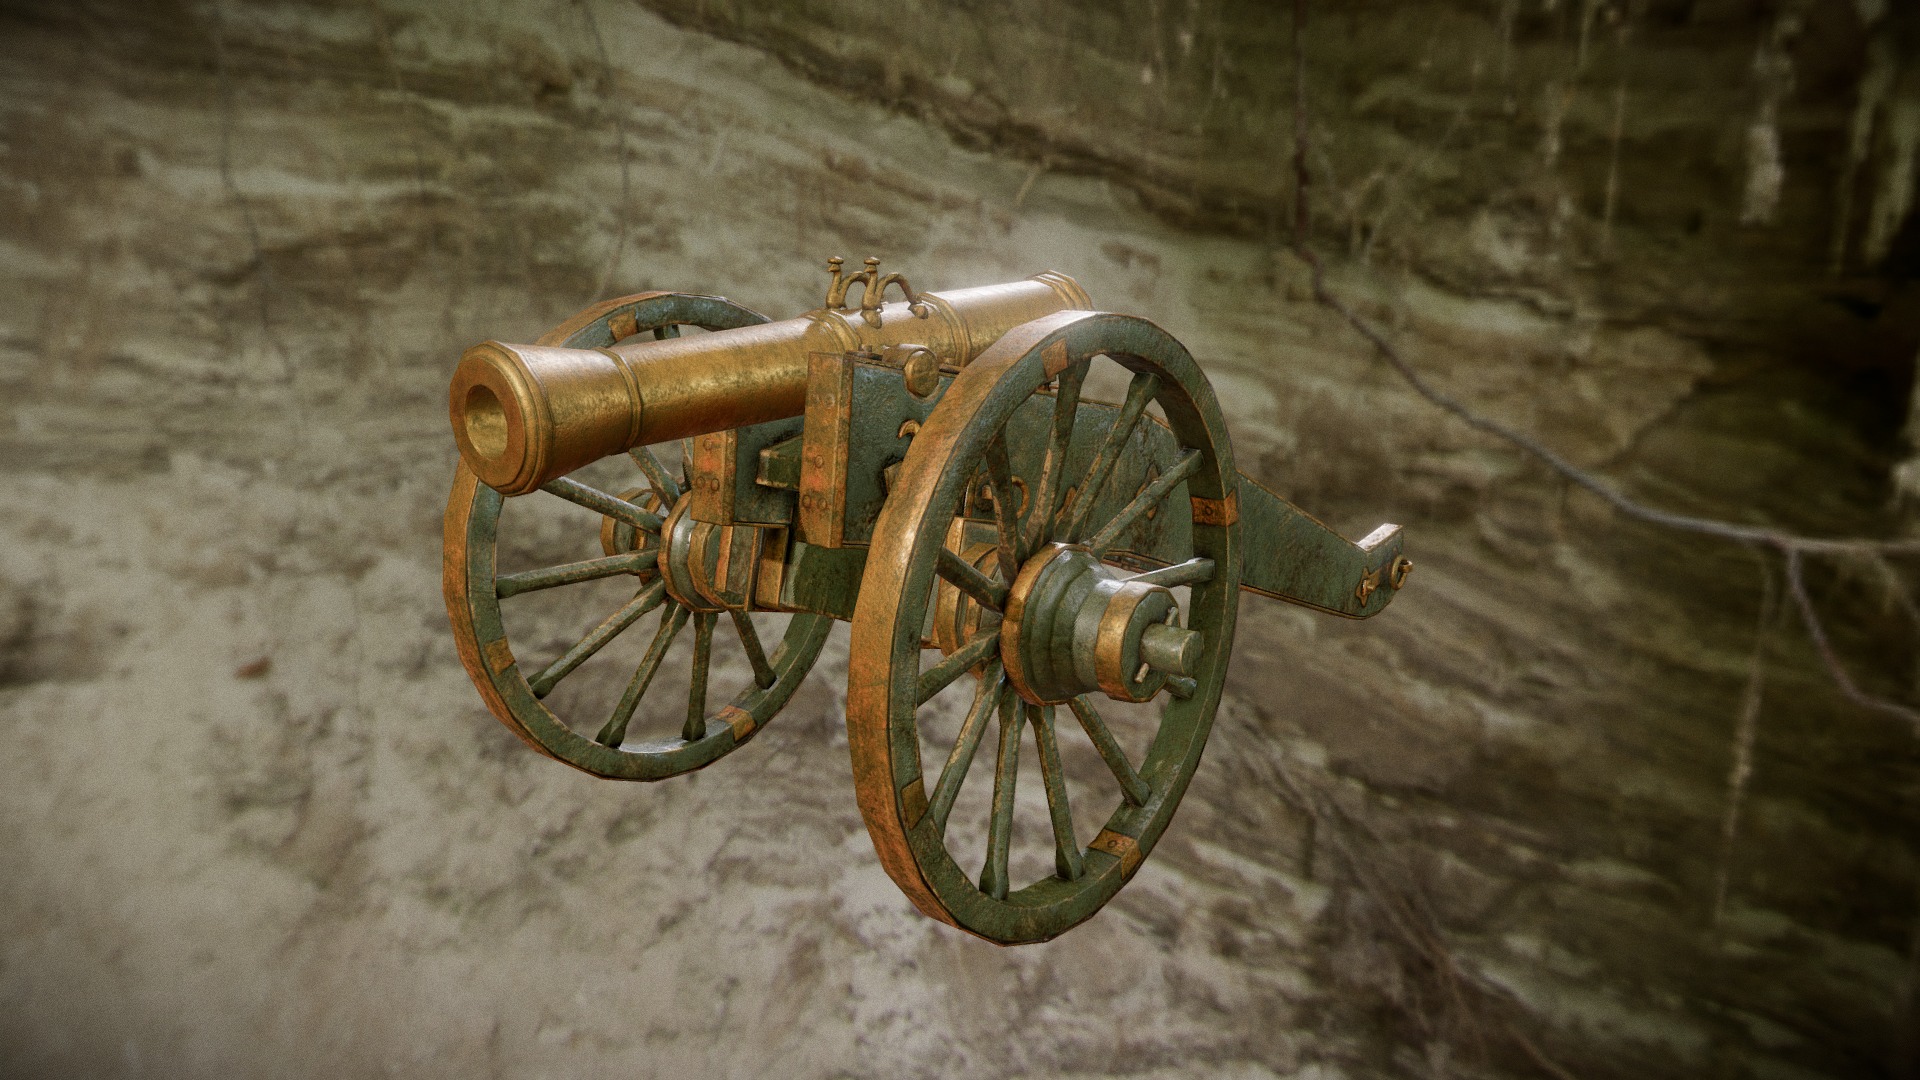 3D model 6 Pounder Russian Gun (1812) - This is a 3D model of the 6 Pounder Russian Gun (1812). The 3D model is about a metal object with a handle.